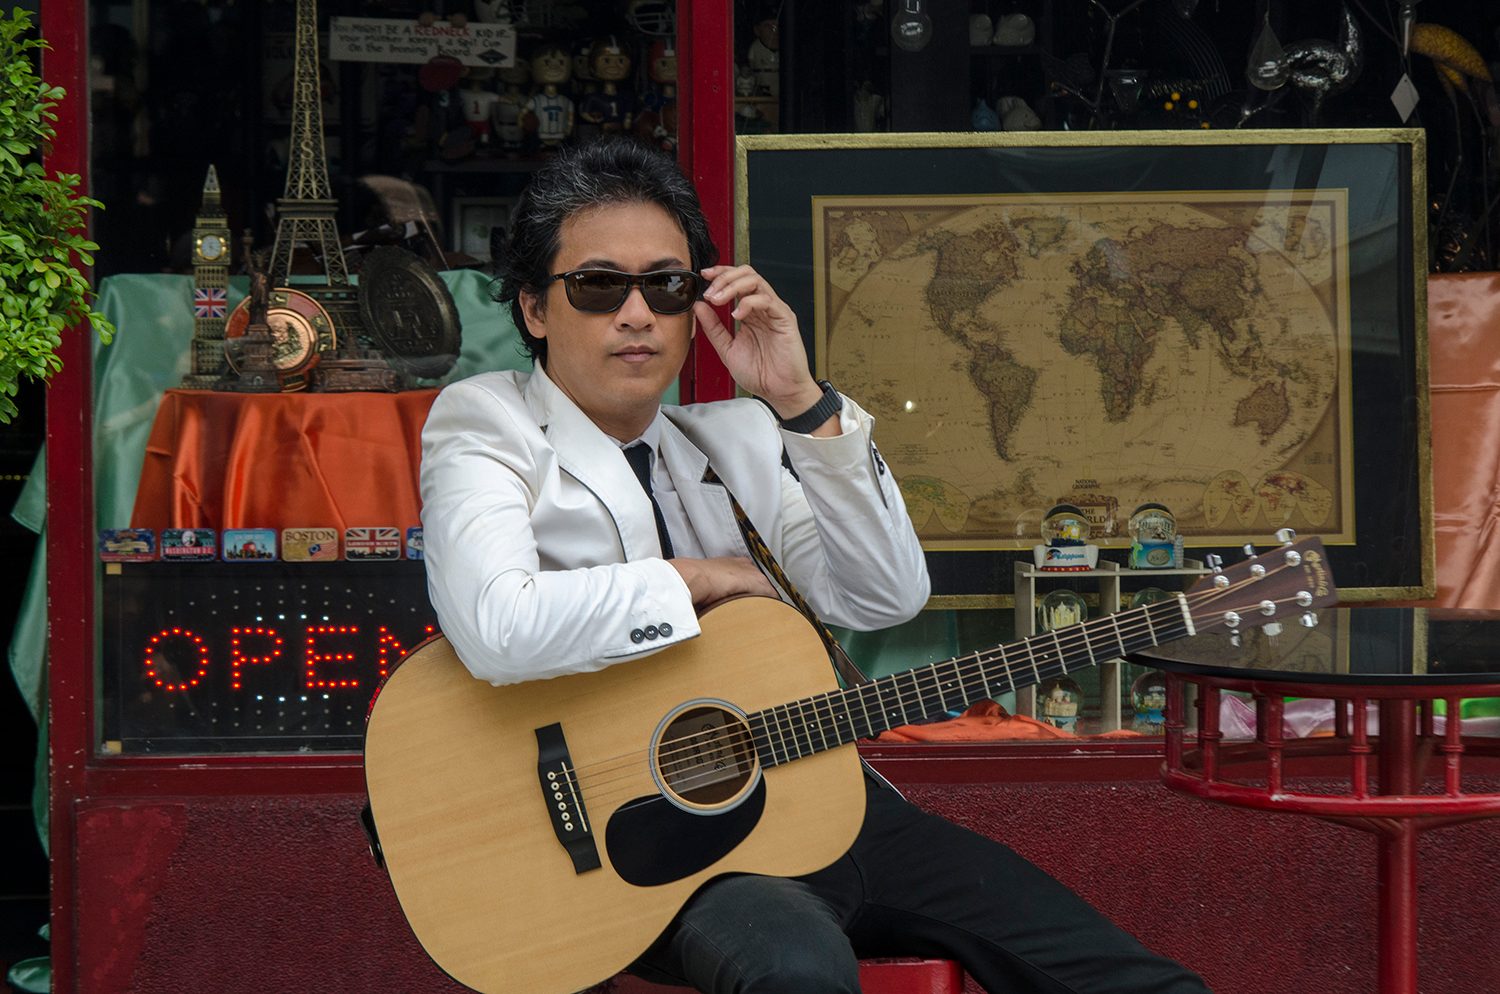 IN PHOTOS: Behind the scenes of Ely Buendia, The Itchyworms’ ‘Pariwara’ music video